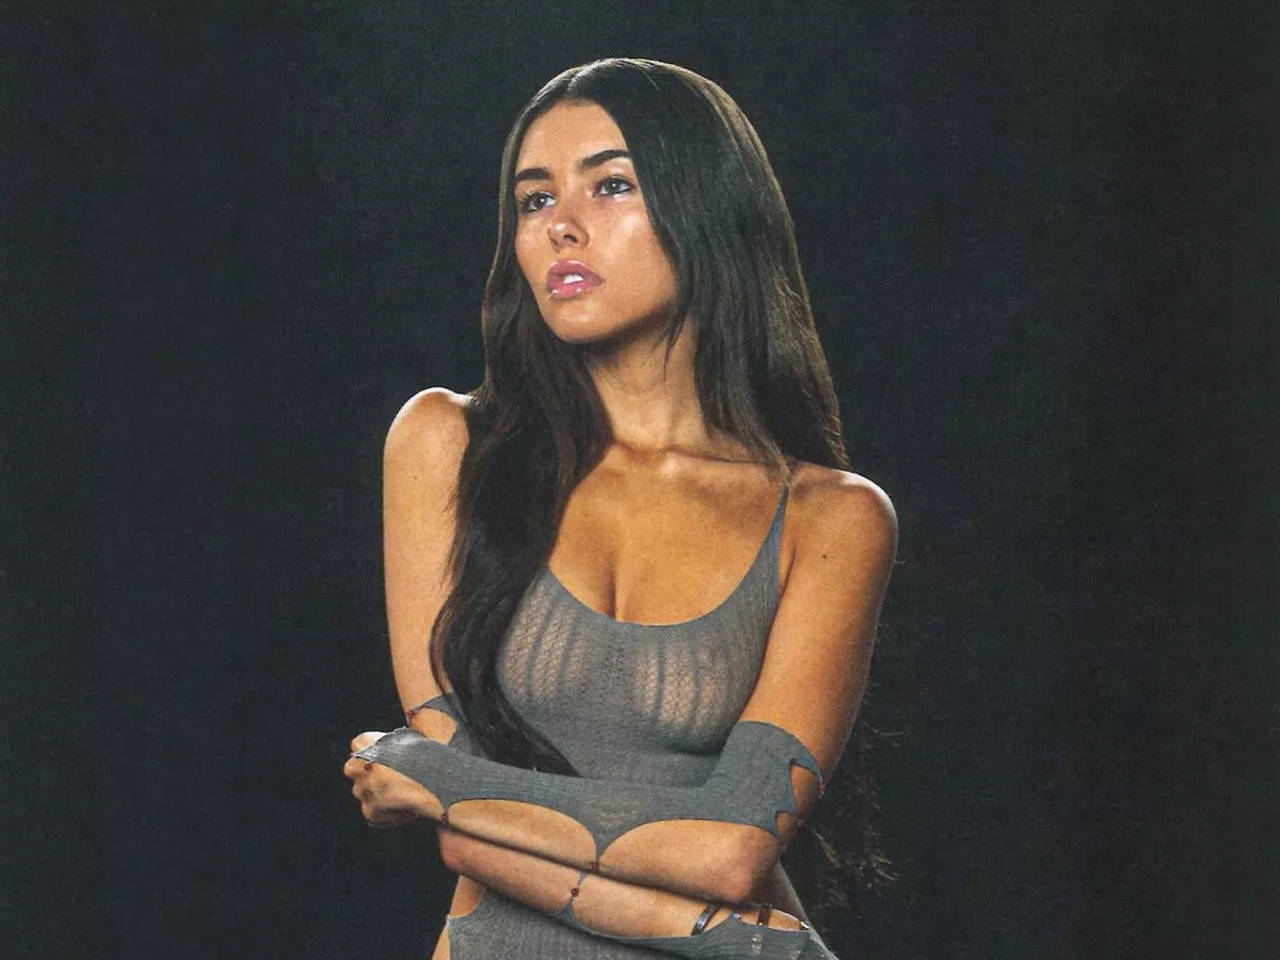 Madison Beer reveals the unpleasant feelings she went through as a minor when her nude video was leaked online English Movie News image image